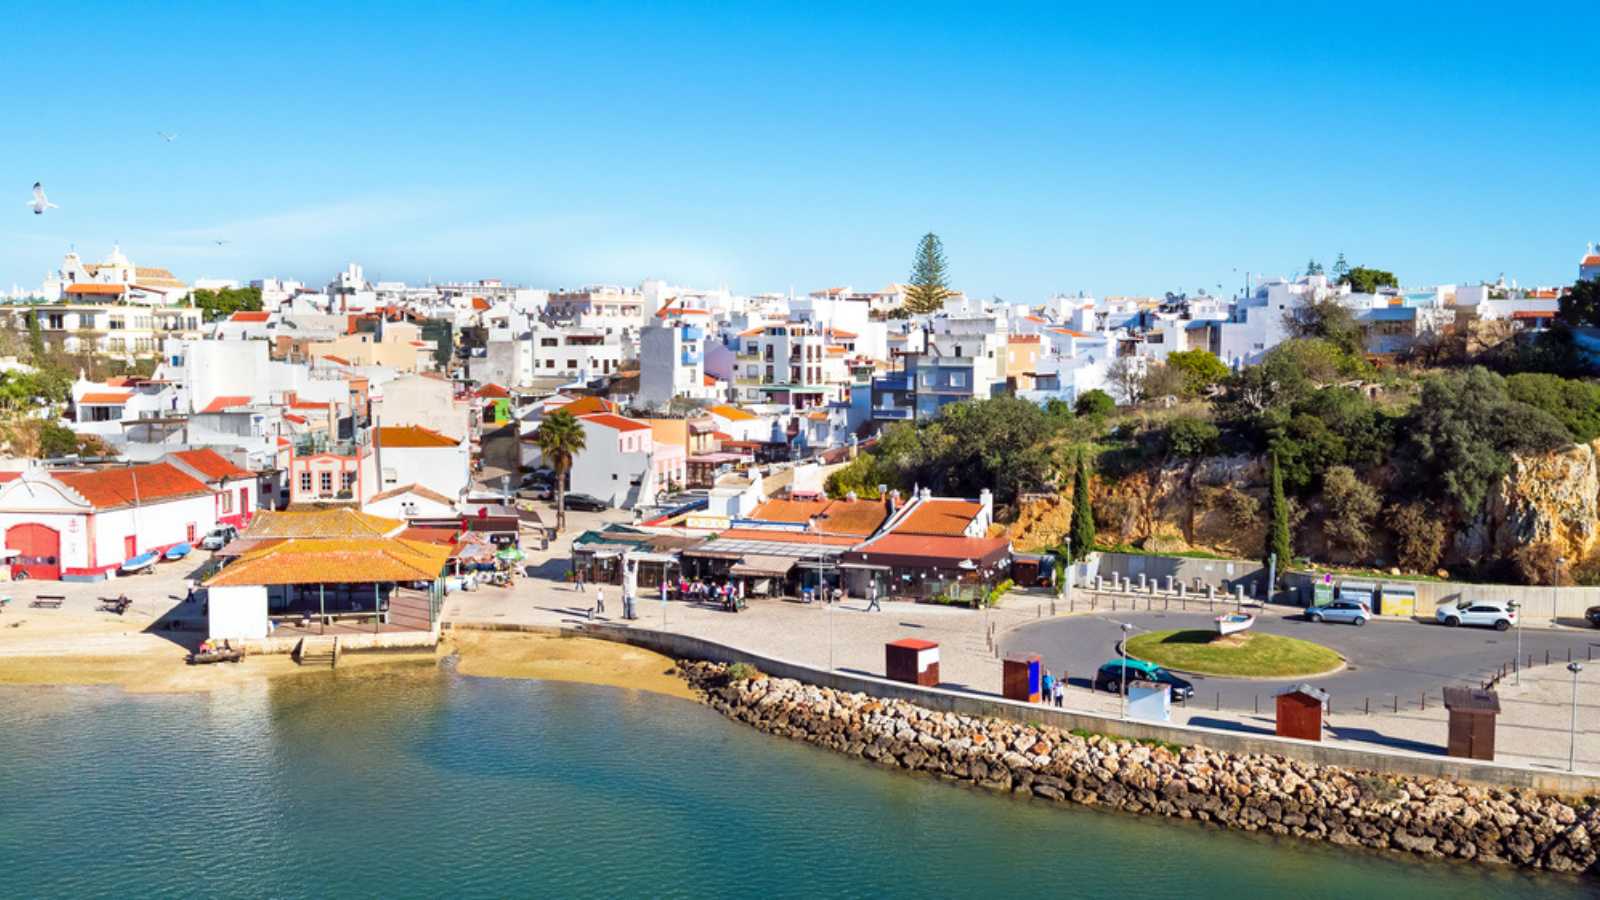 <p>Though there are many reasons for travelers to fall in love with Portugal, its cuisine is by far one of the most emphatic of them.</p><p>Unlike Spanish food, which uses spices like parsley, saffron, and paprika, Portugal’s cuisine incorporates spices like piri piri, cinnamon, and bay leaves. Some famous dishes in Portugal include piri piri chicken, Cataplana de Marisco, and pastel de nata, all recommended for first-timers in Portugal to try!</p>